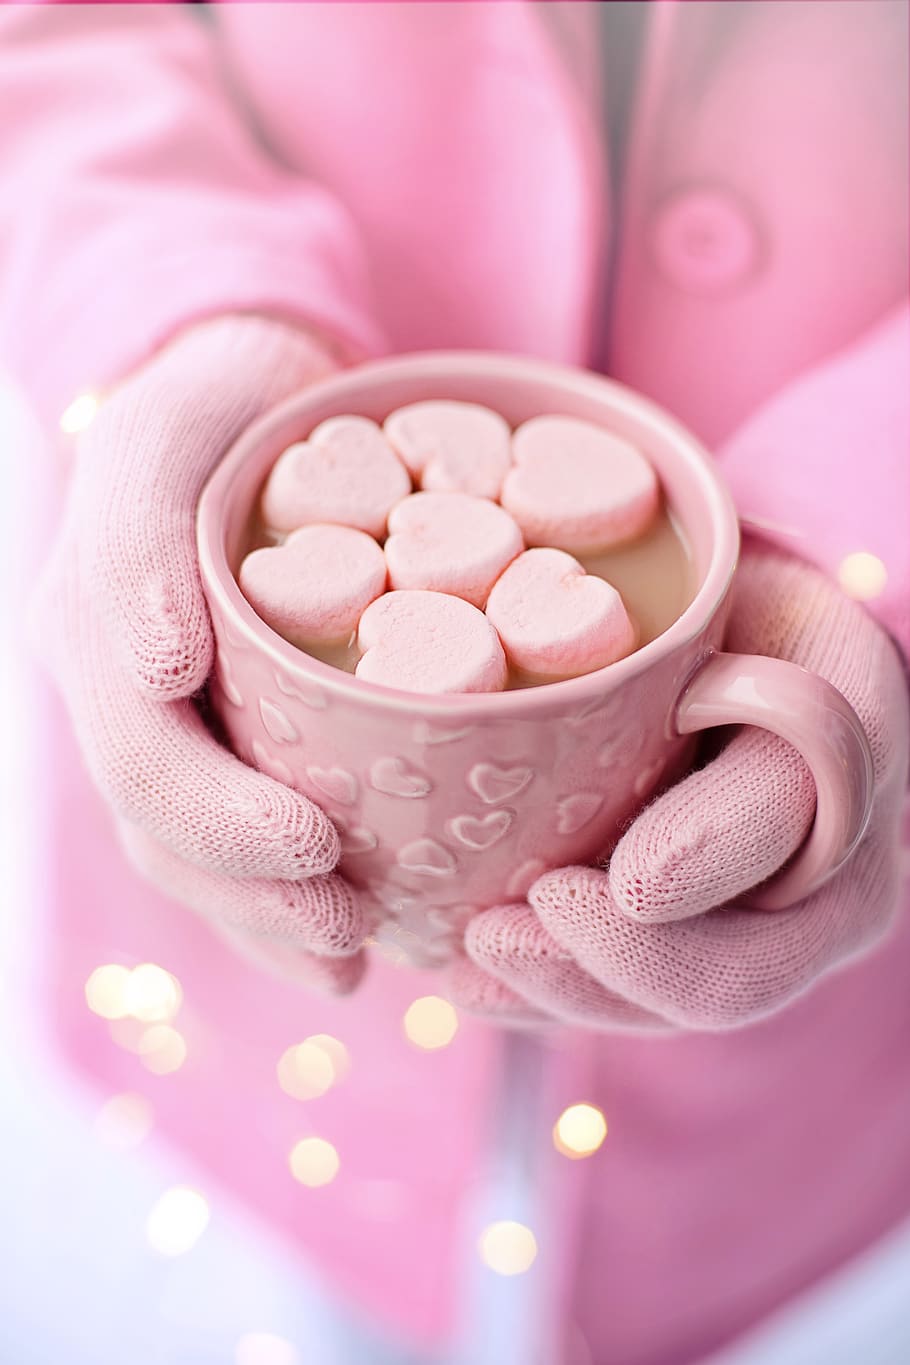 HD wallpaper: valentine's day, hot chocolate, hot cocoa, pink ...